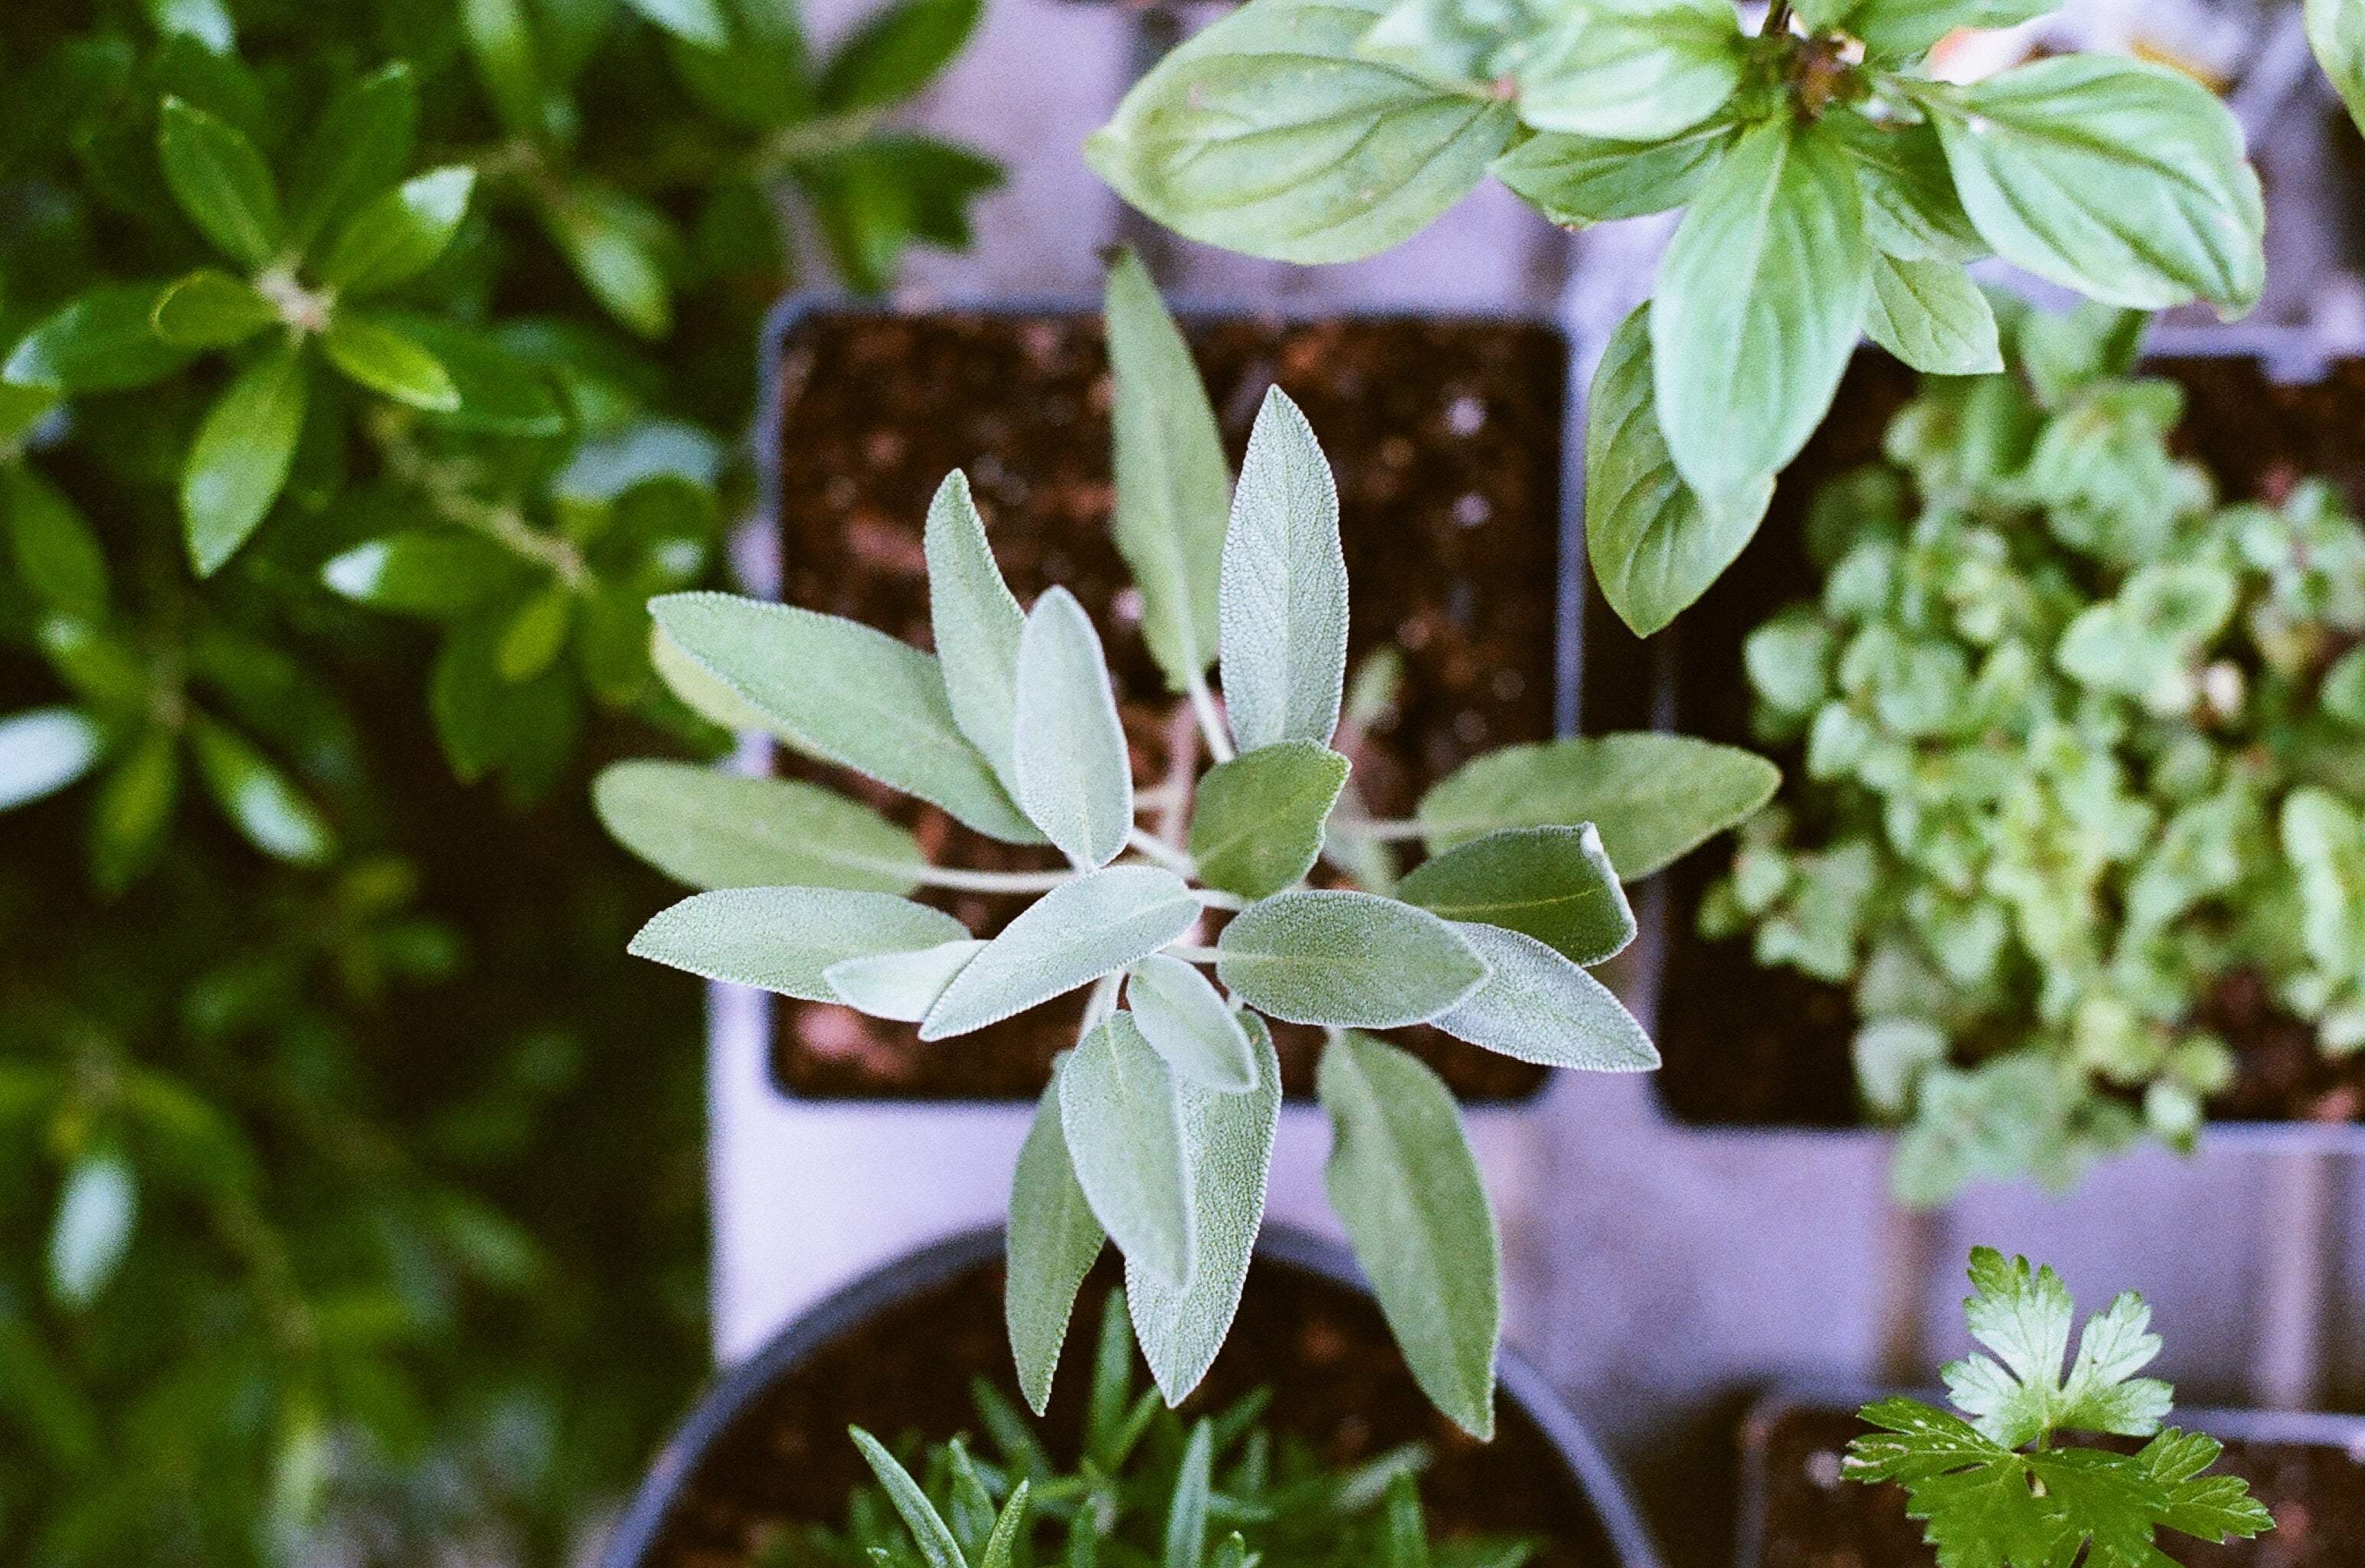 Sage: The Common Herb That Can Improve Memory